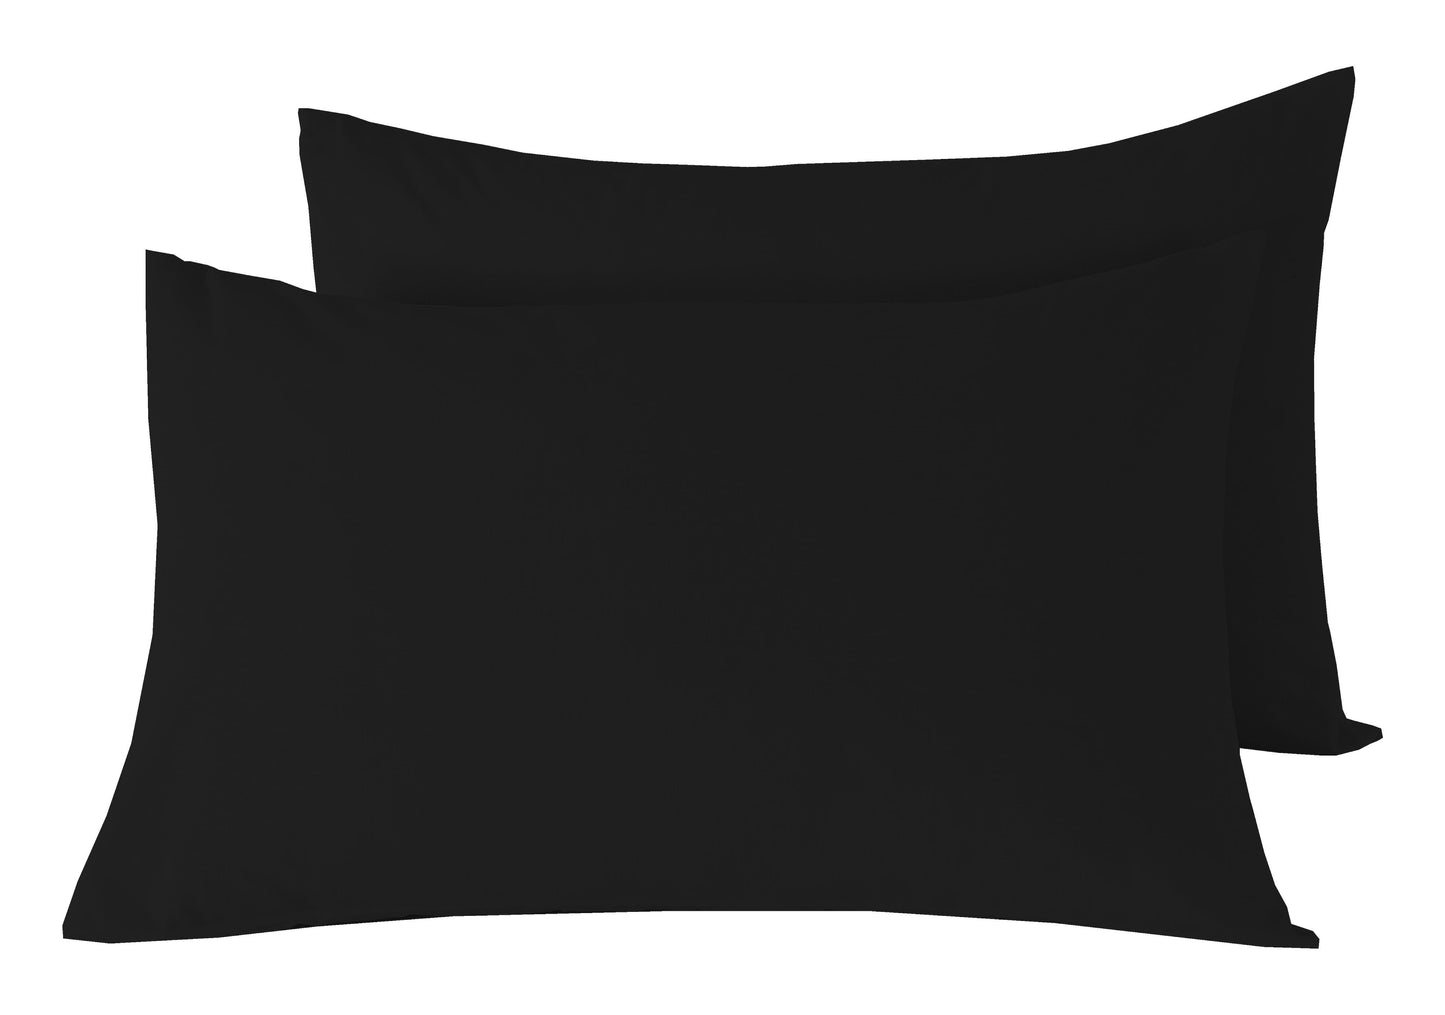 Basics Fitted Sheet PILLOWCASES / BLACK OLIVIA ROCCO basics Fitted Sheet